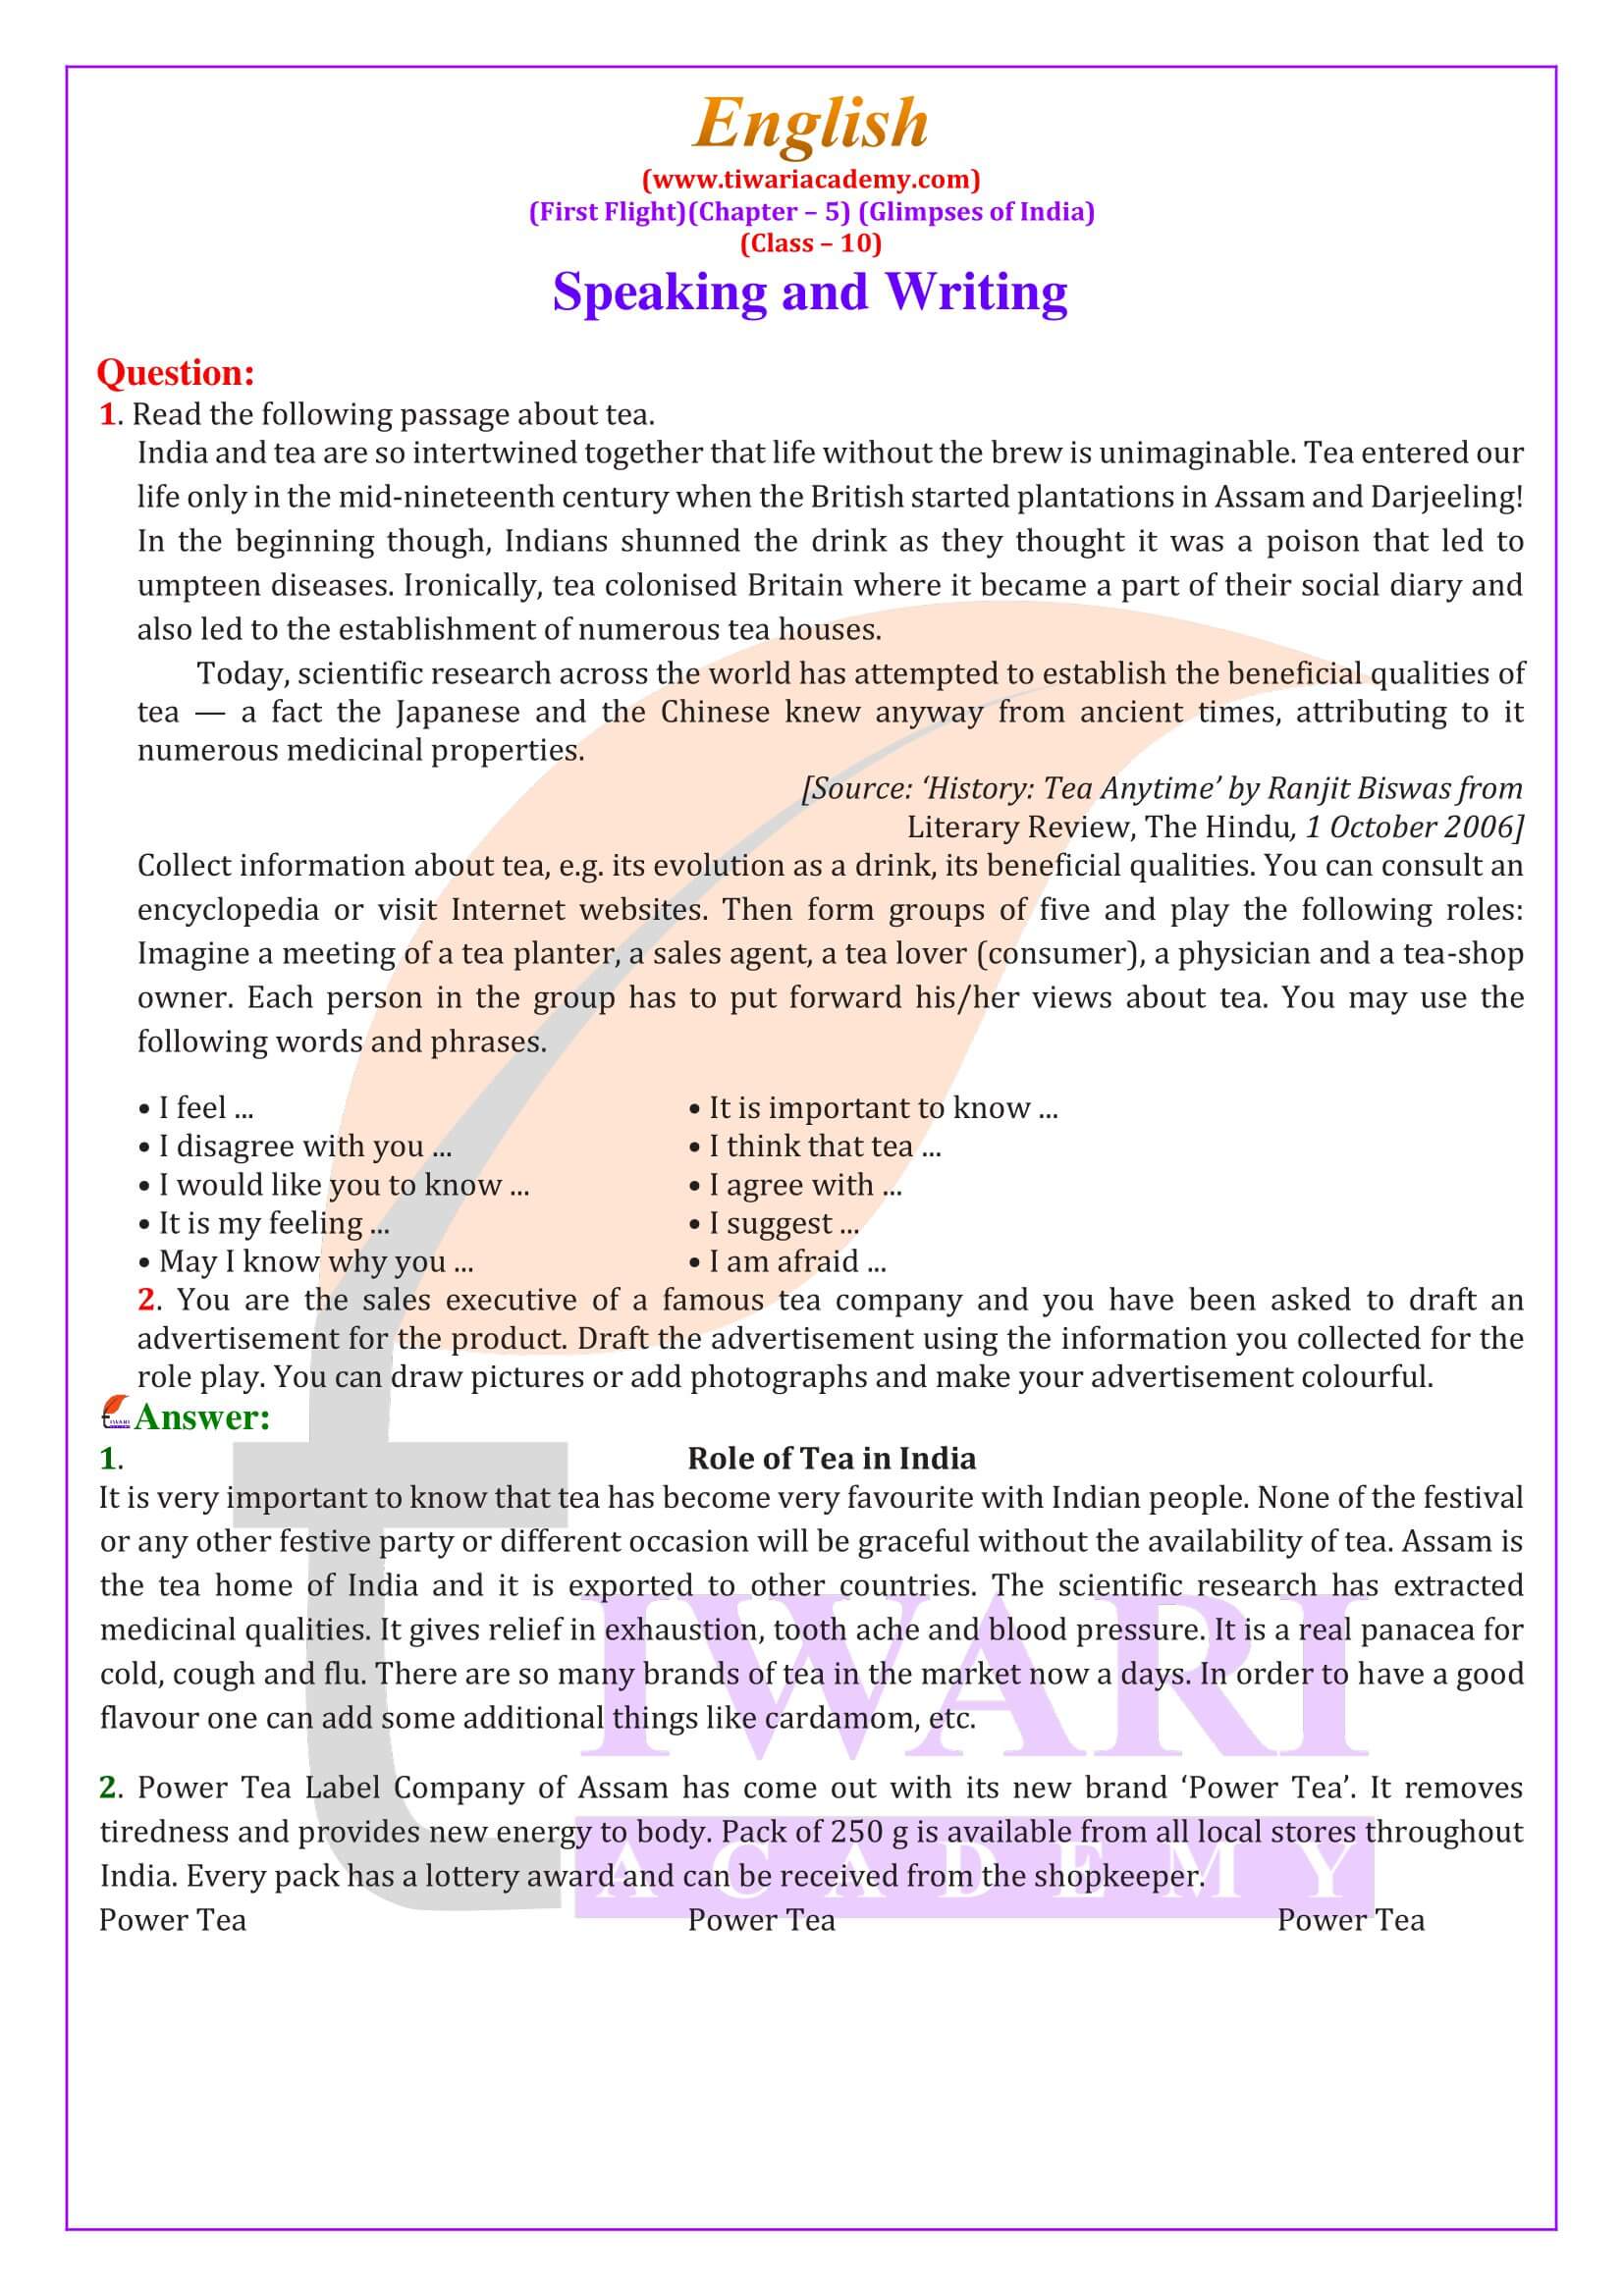 Class 10 English First Flight Chapter 5 Glimpses of India answers guide